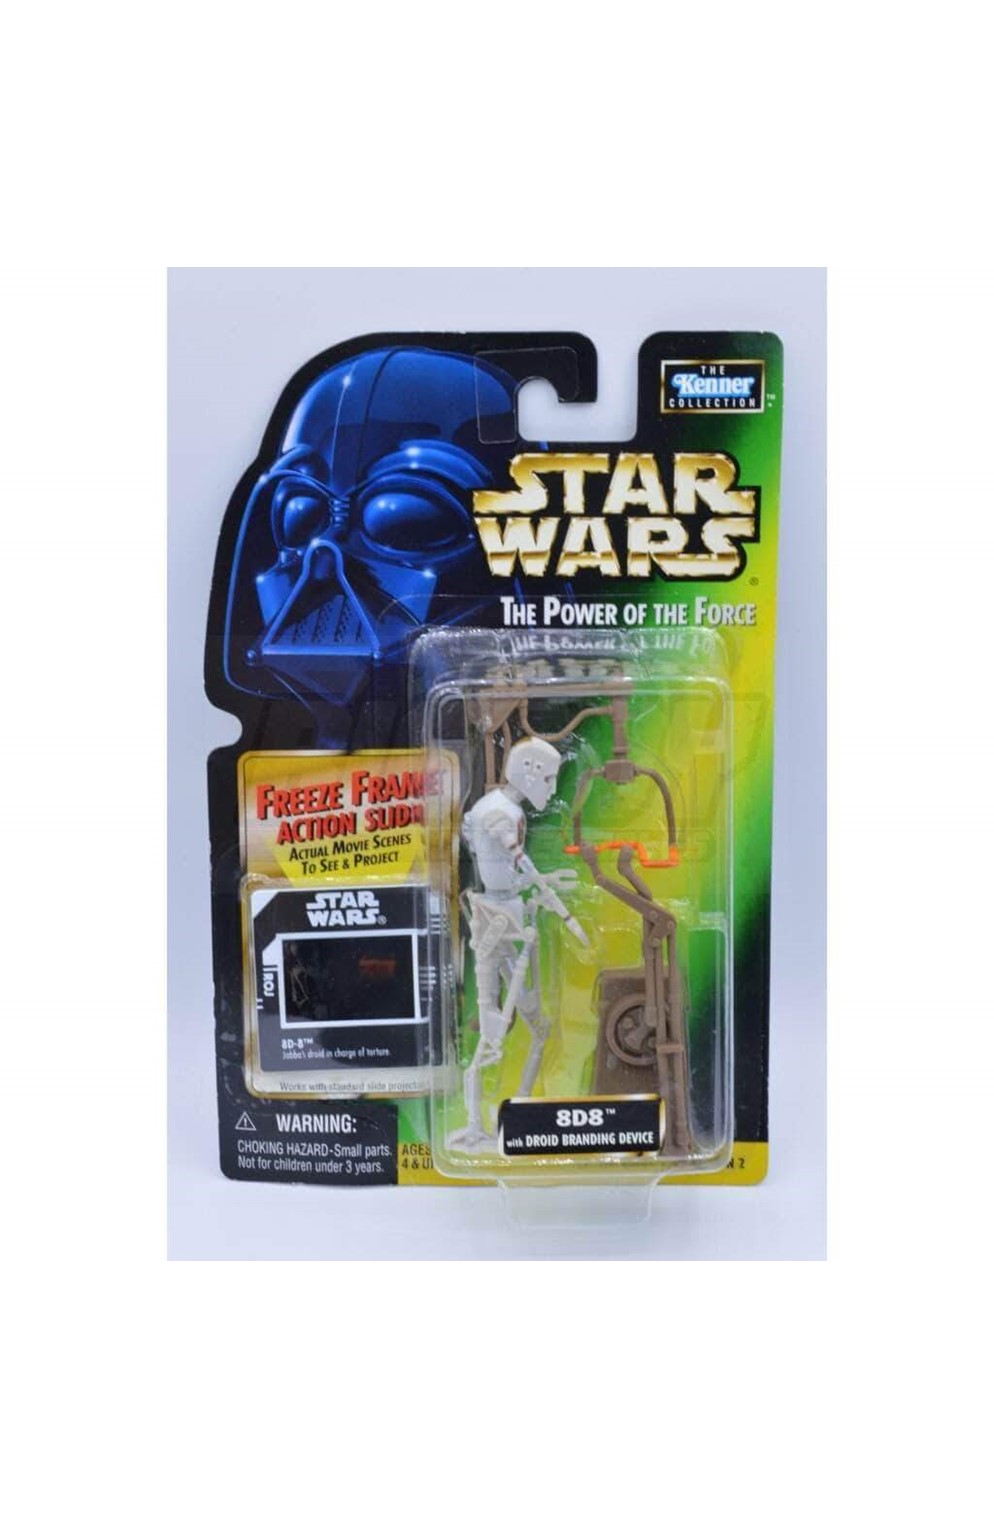 Star Wars Power of The Force 8D8 Branding Droid Figure